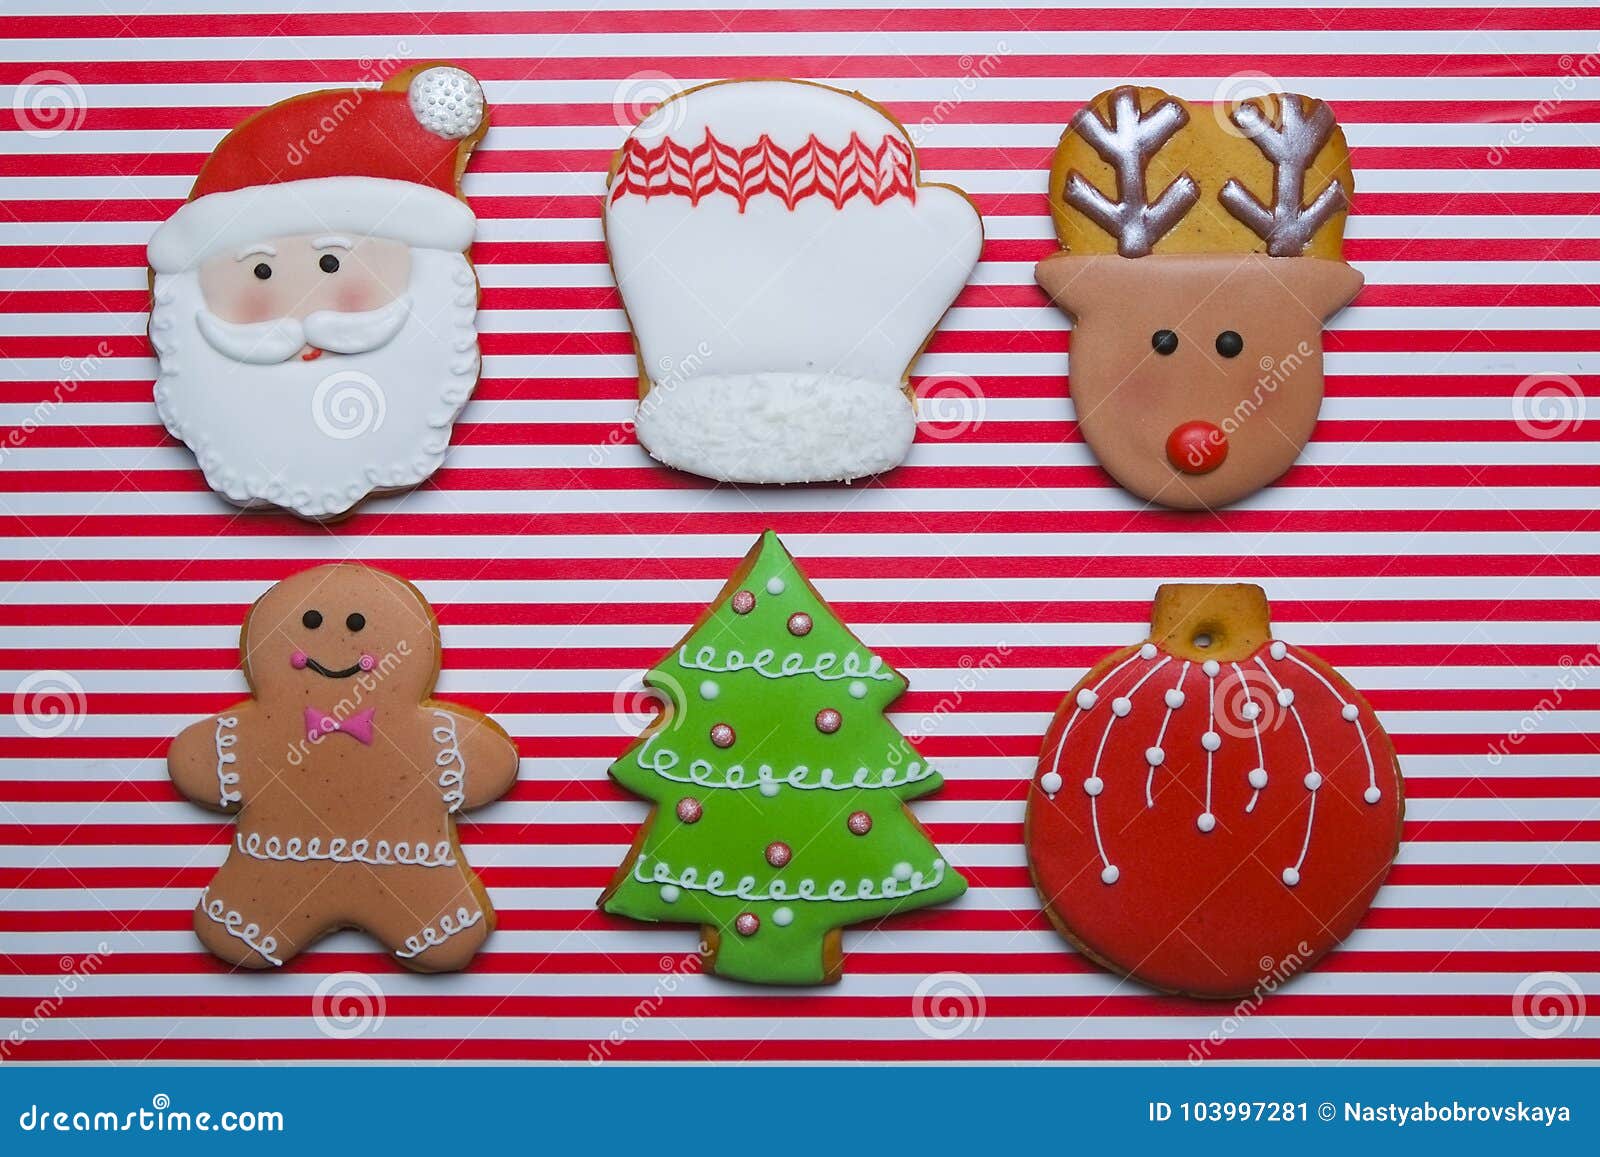 https://thumbs.dreamstime.com/z/christmas-cookies-stripe-background-top-view-various-types-gingerbread-flat-lay-characters-cookie-homemade-frame-wooden-table-103997281.jpg